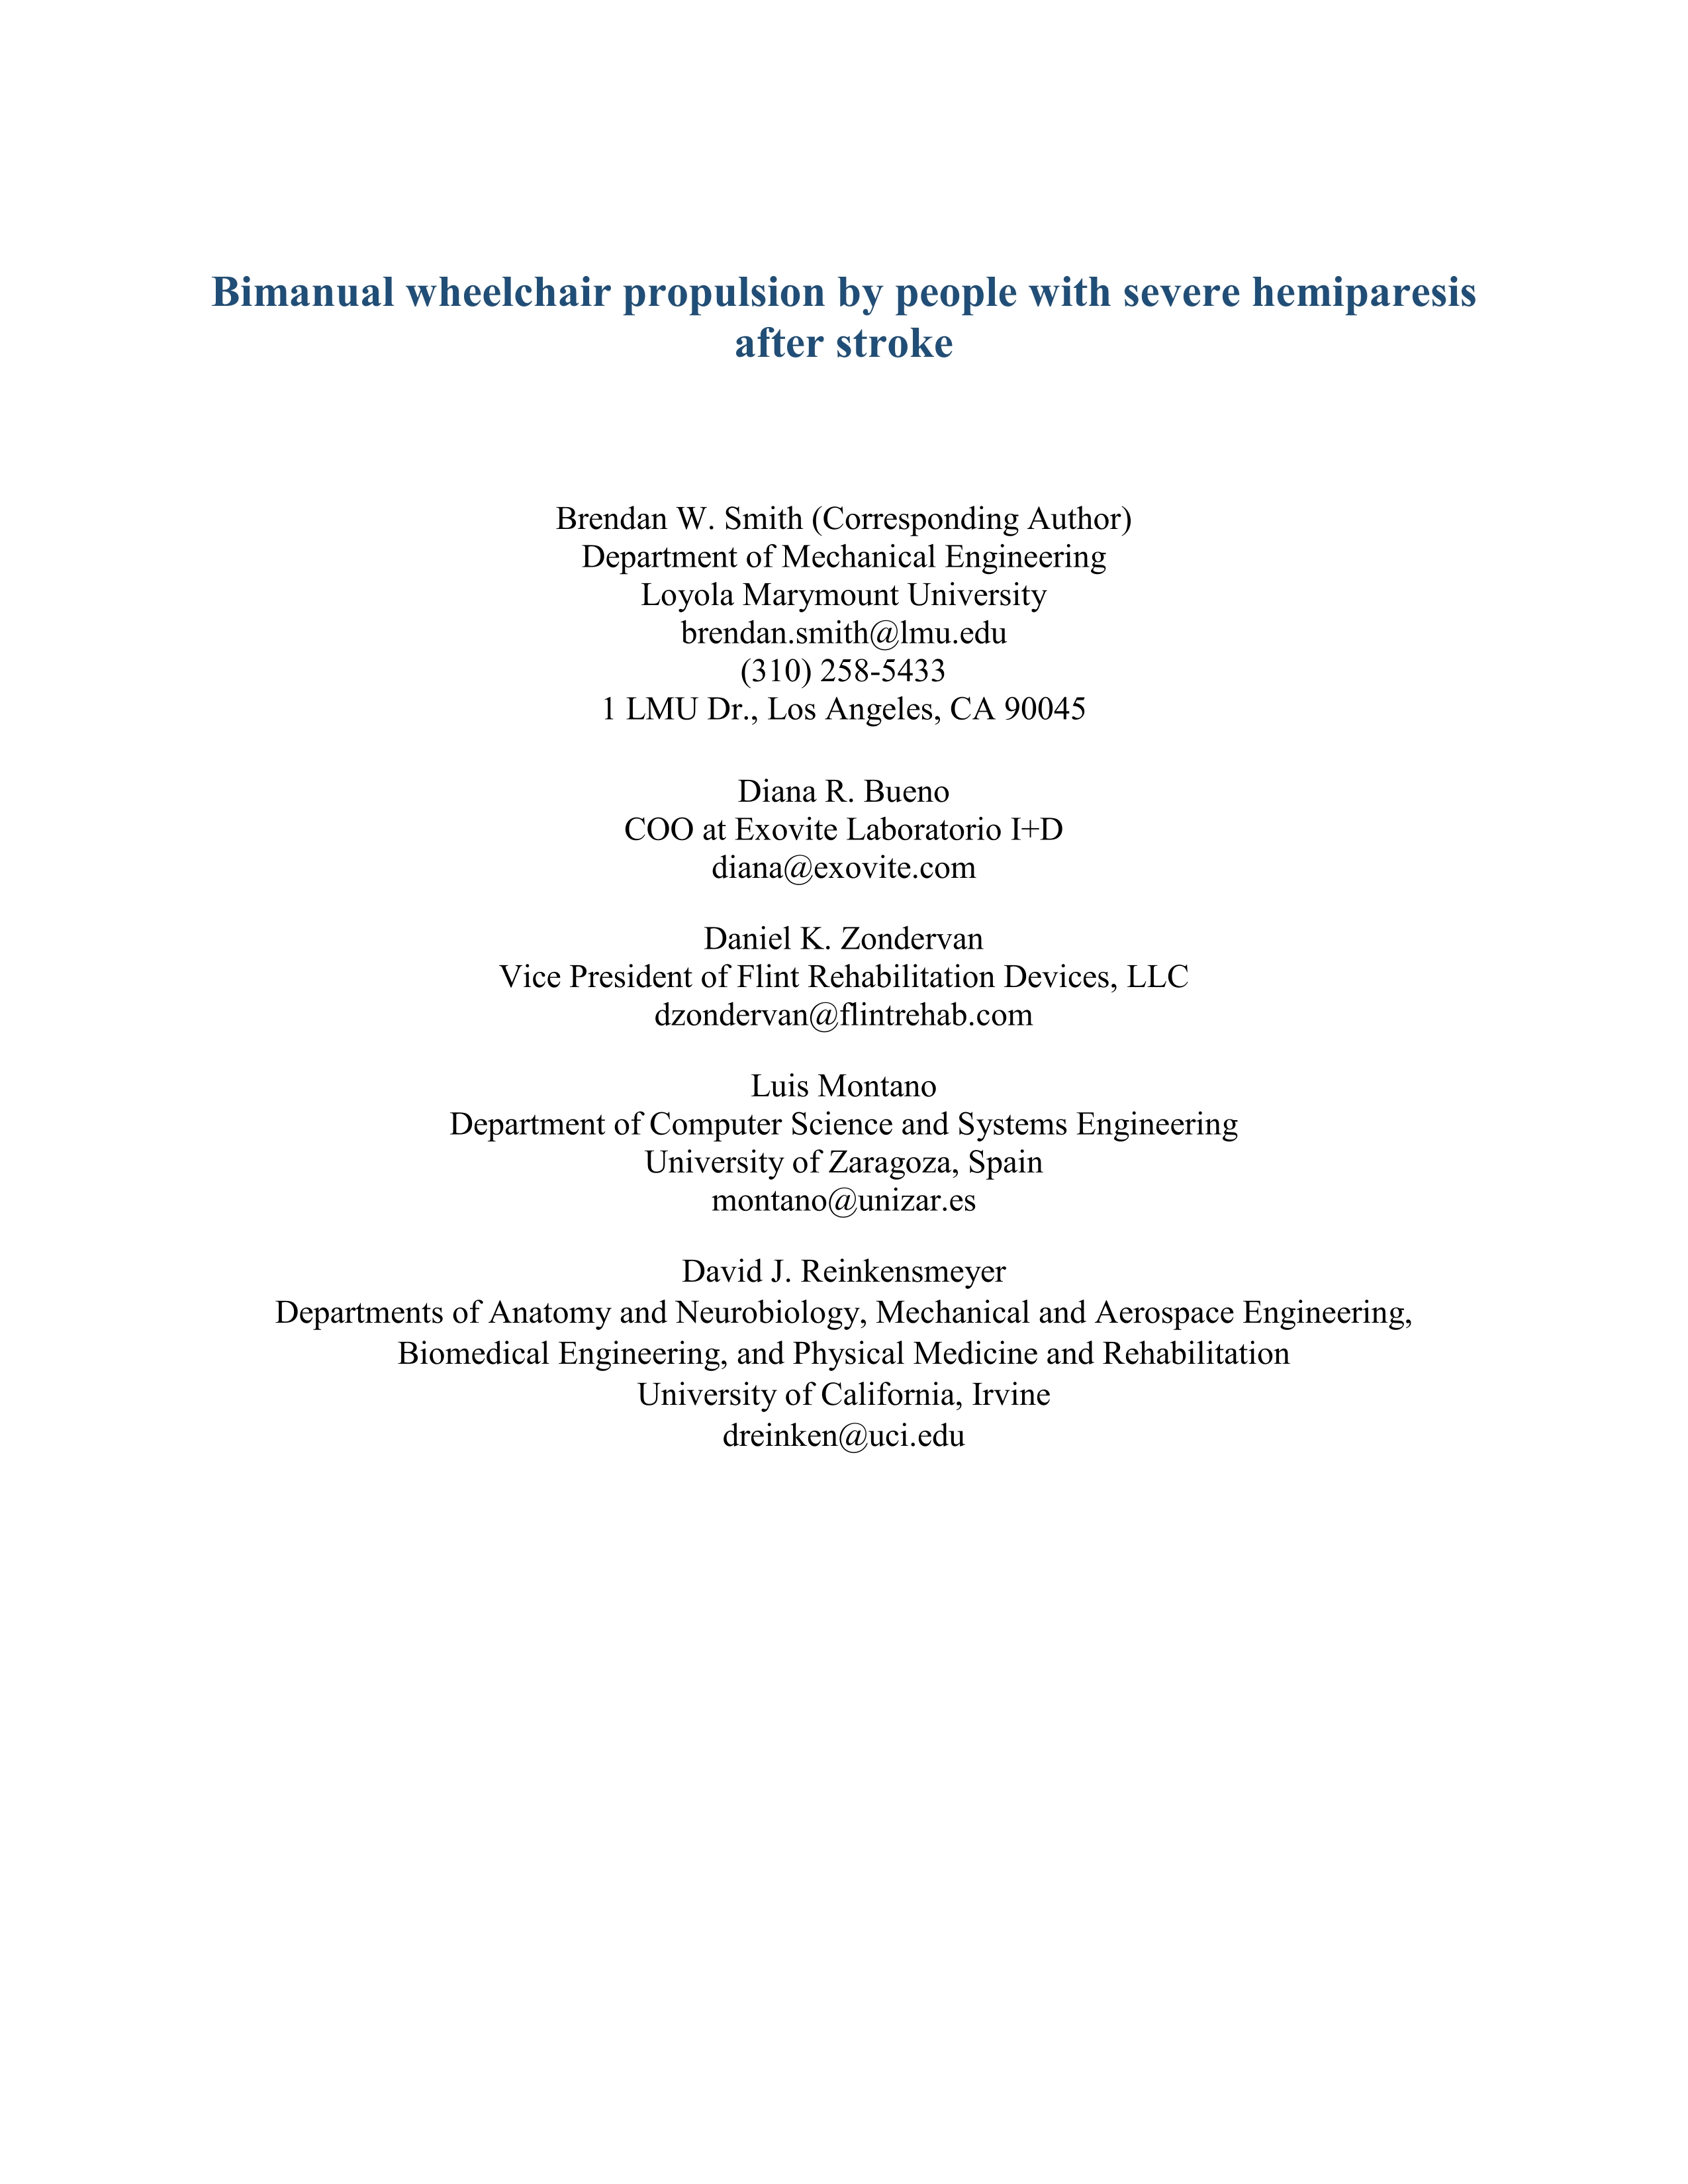 Bimanual wheelchair propulsion by people with severe hemiparesis after stroke